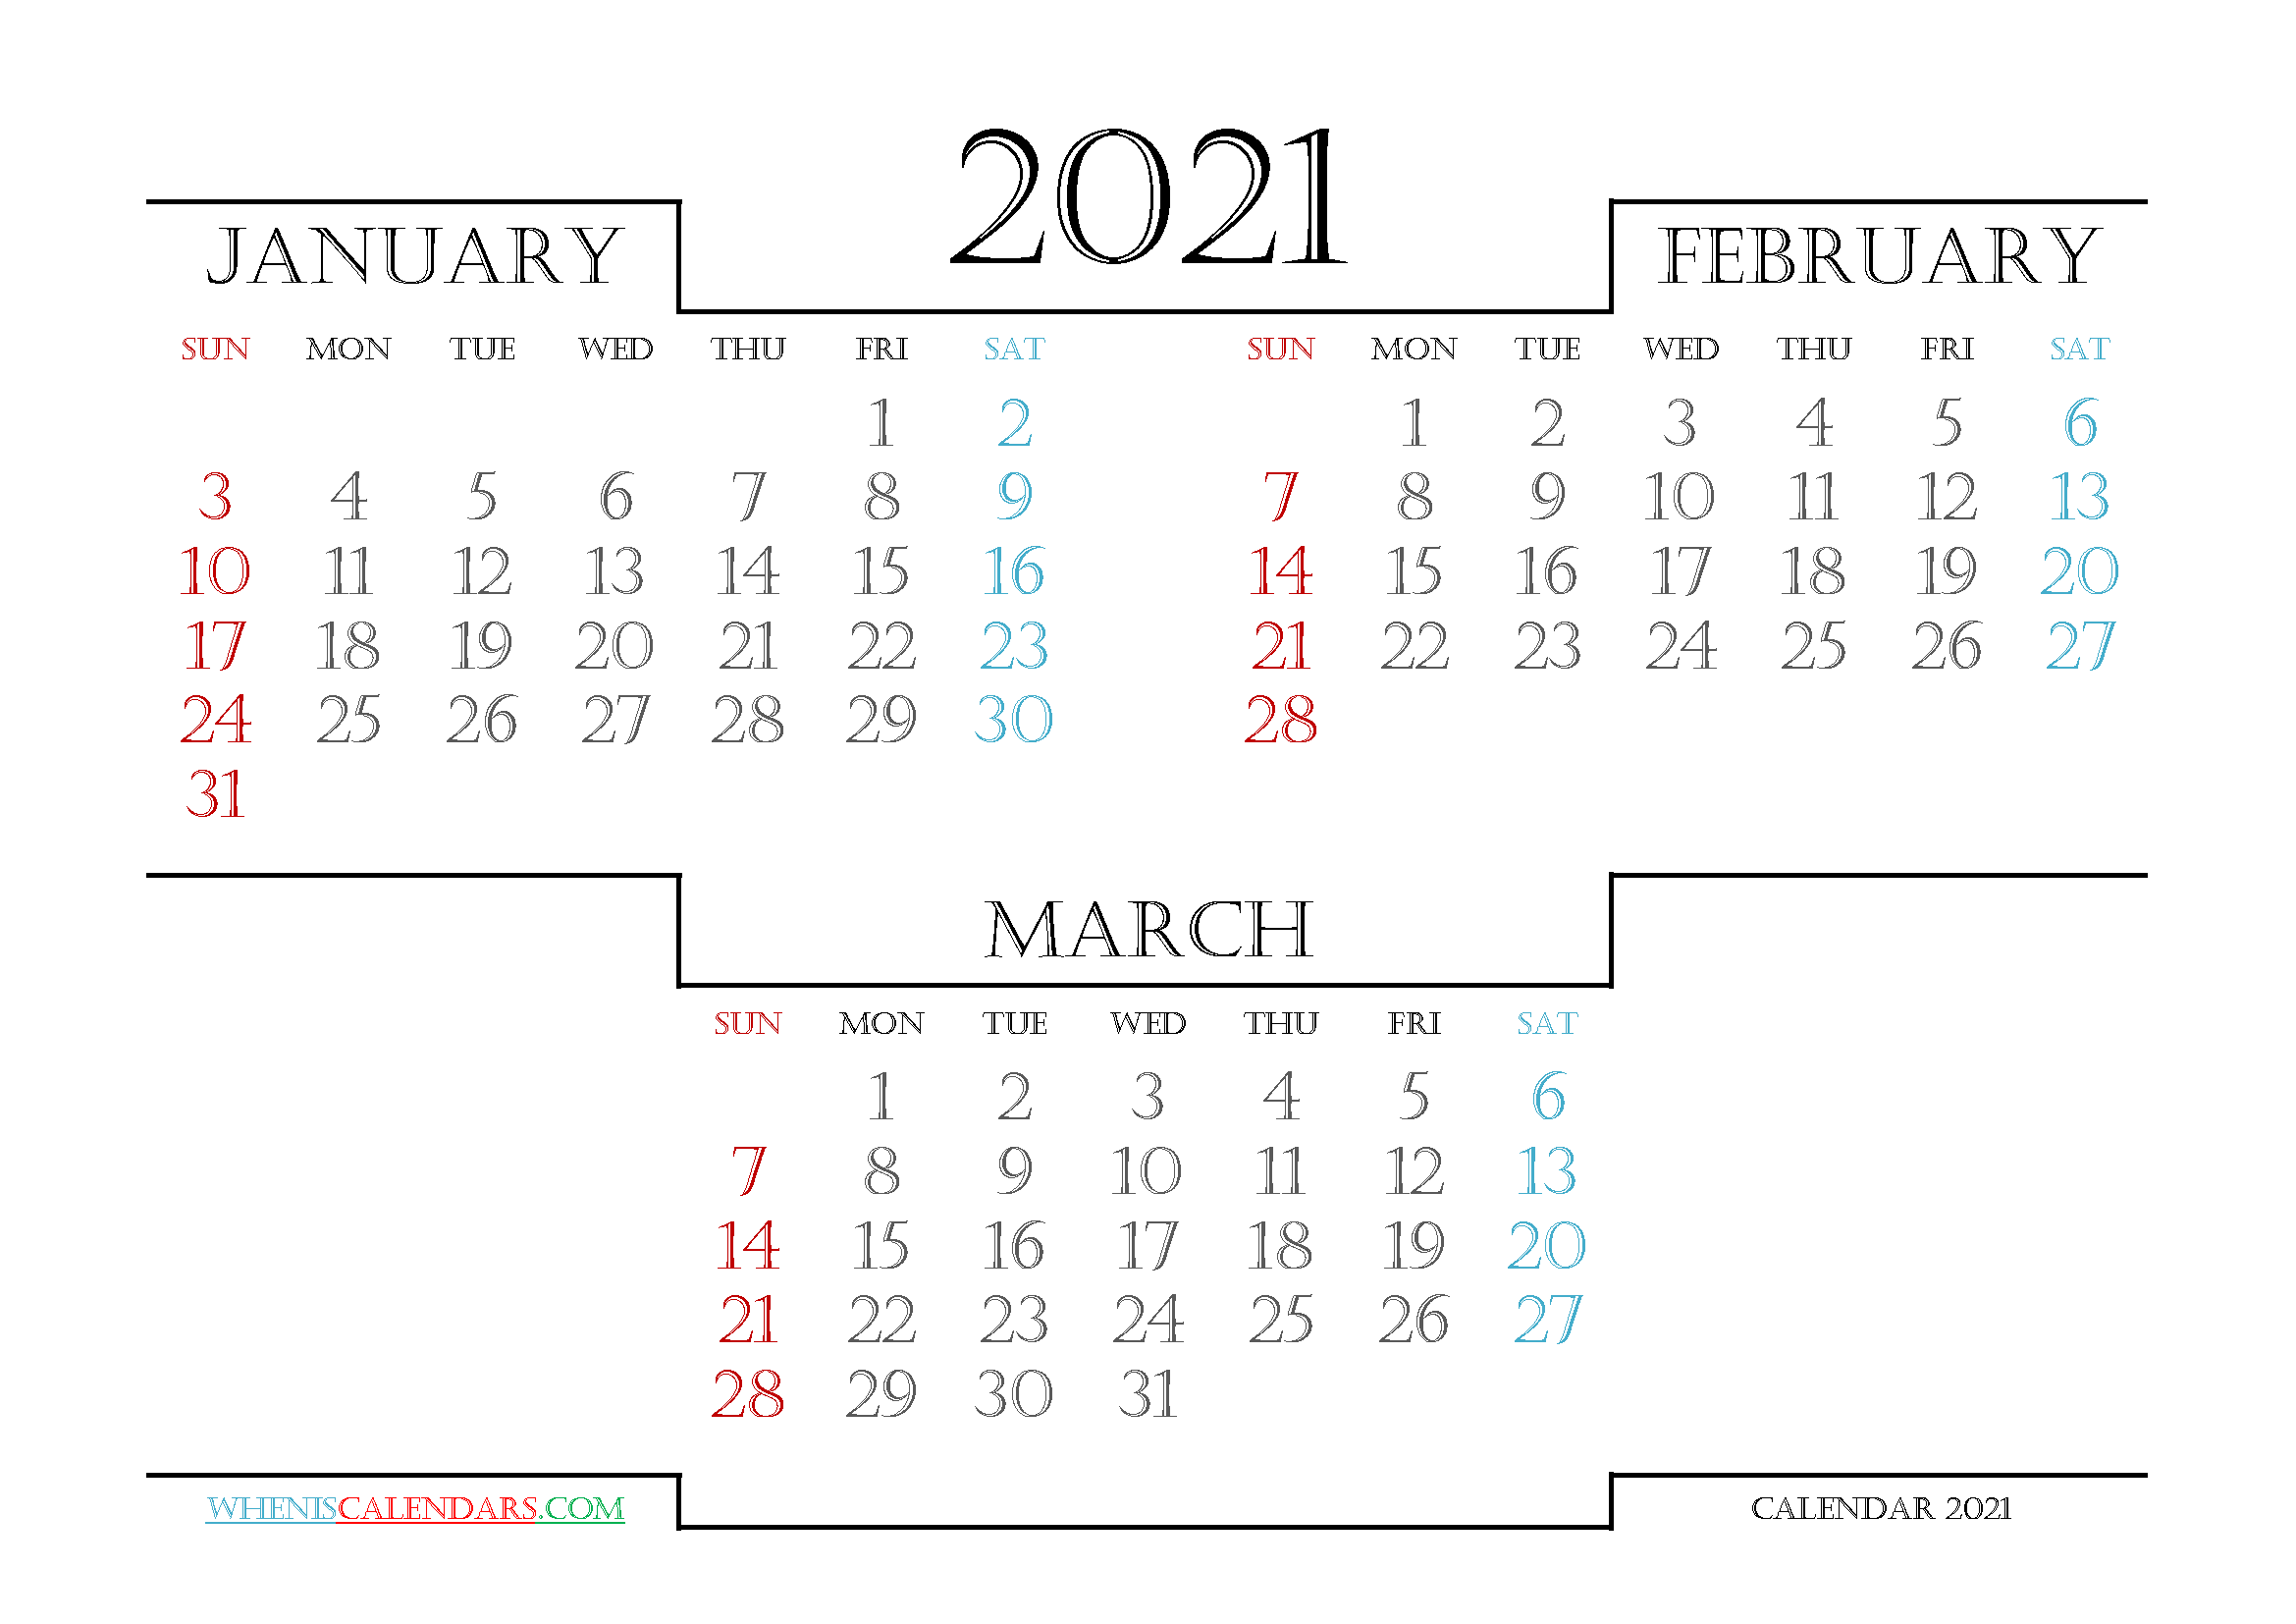 keeping-an-overview-of-2023-made-easy-with-the-printable-year-calendar